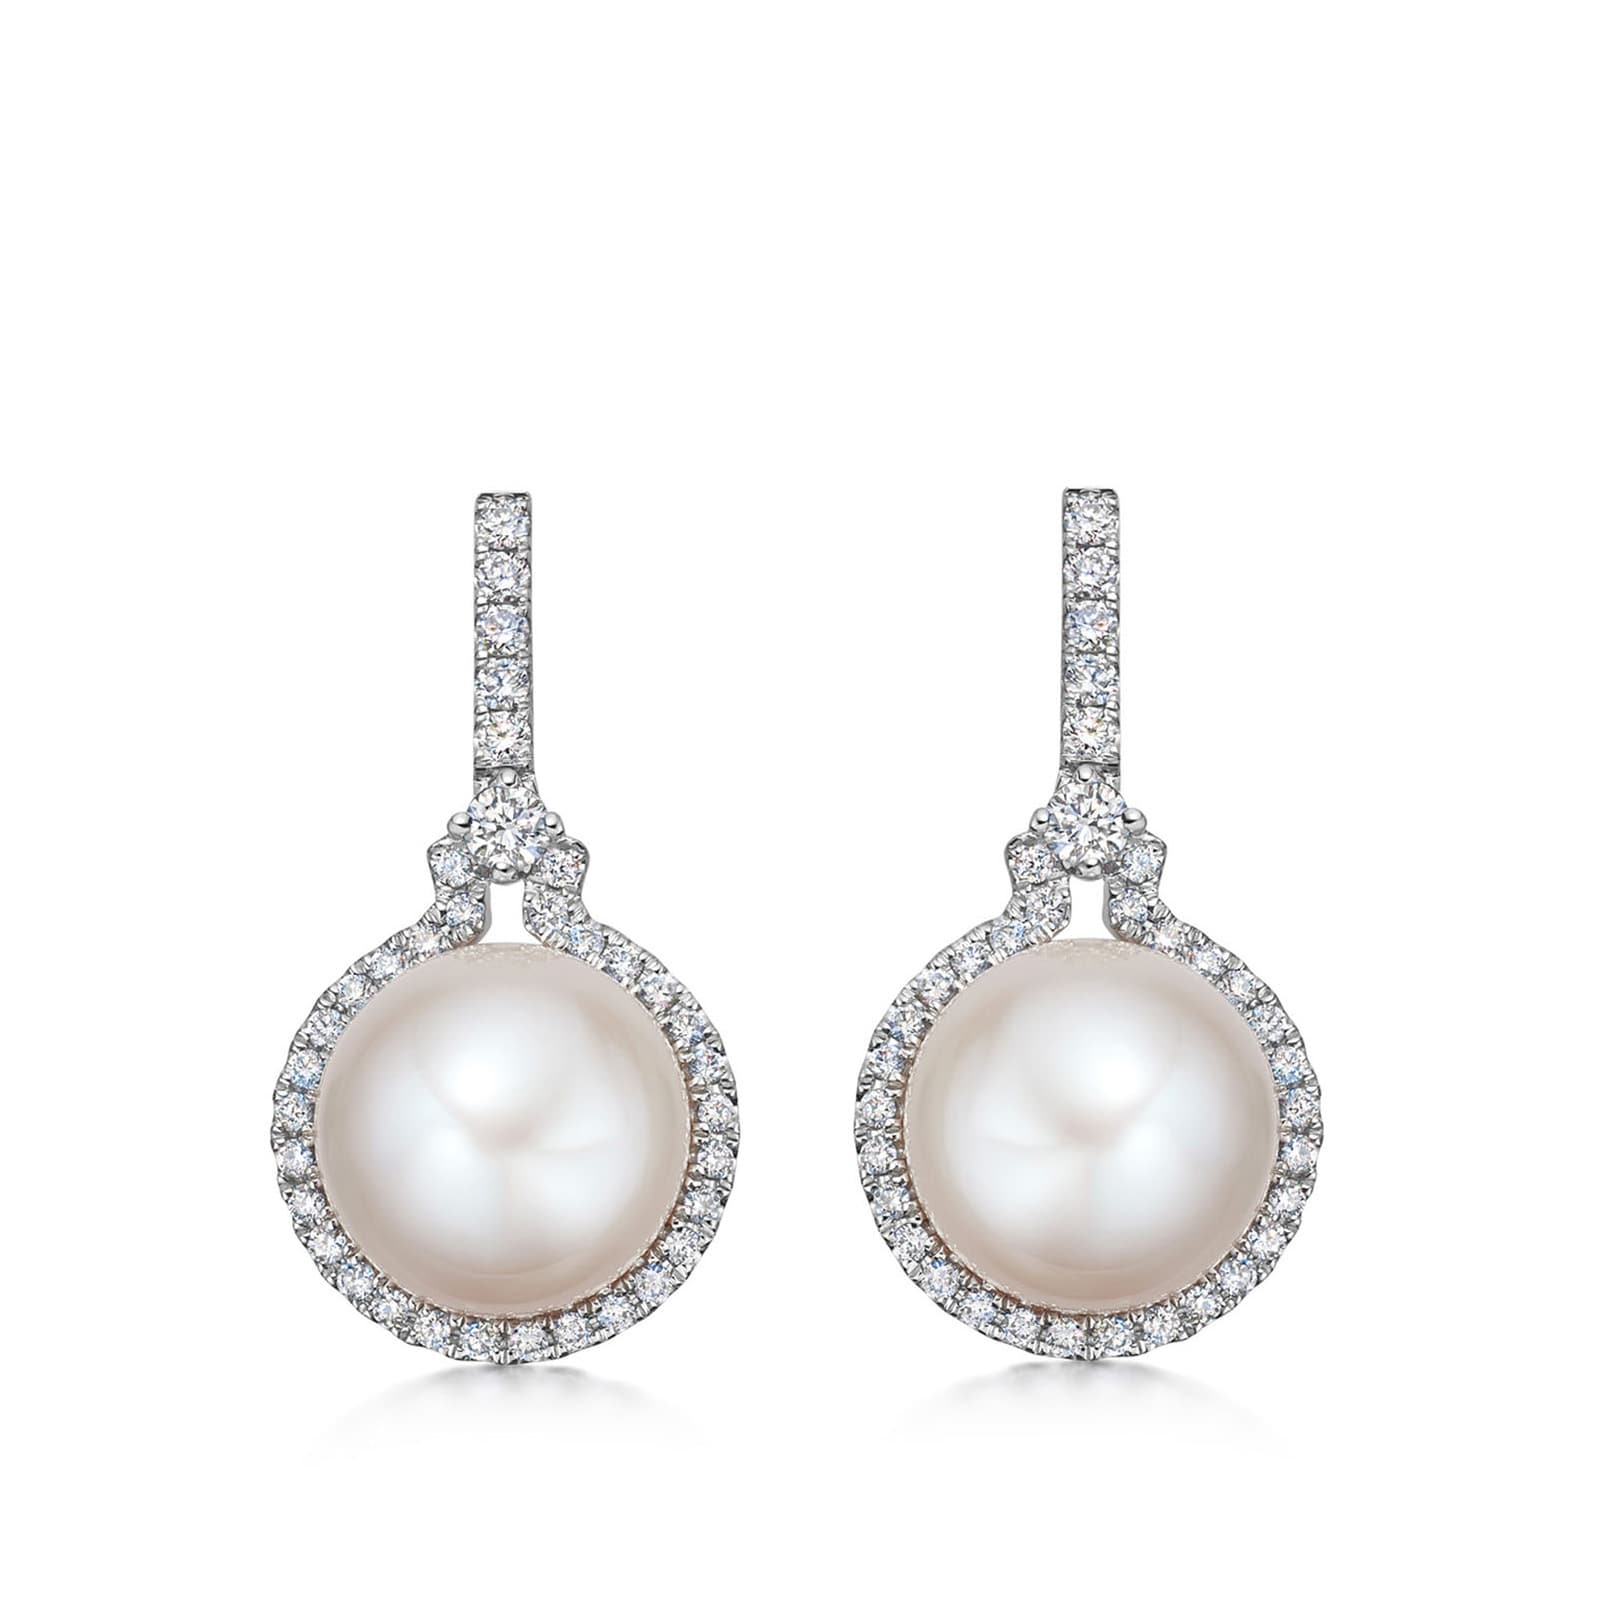 18ct White Gold Manon Pearl and Diamond Earrings